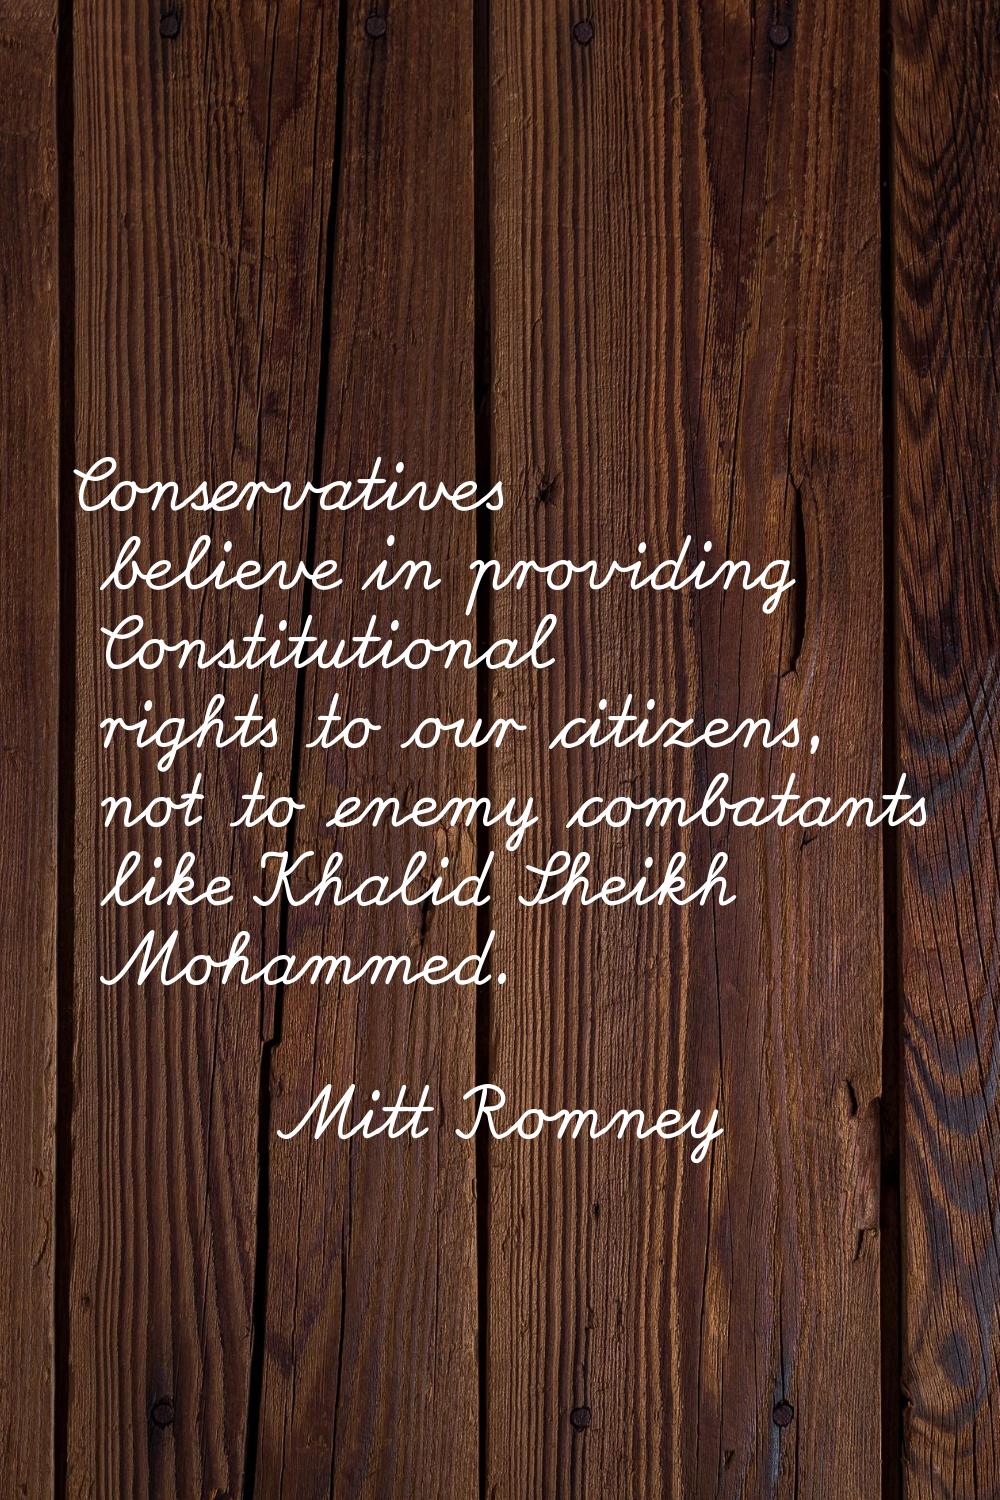 Conservatives believe in providing Constitutional rights to our citizens, not to enemy combatants l